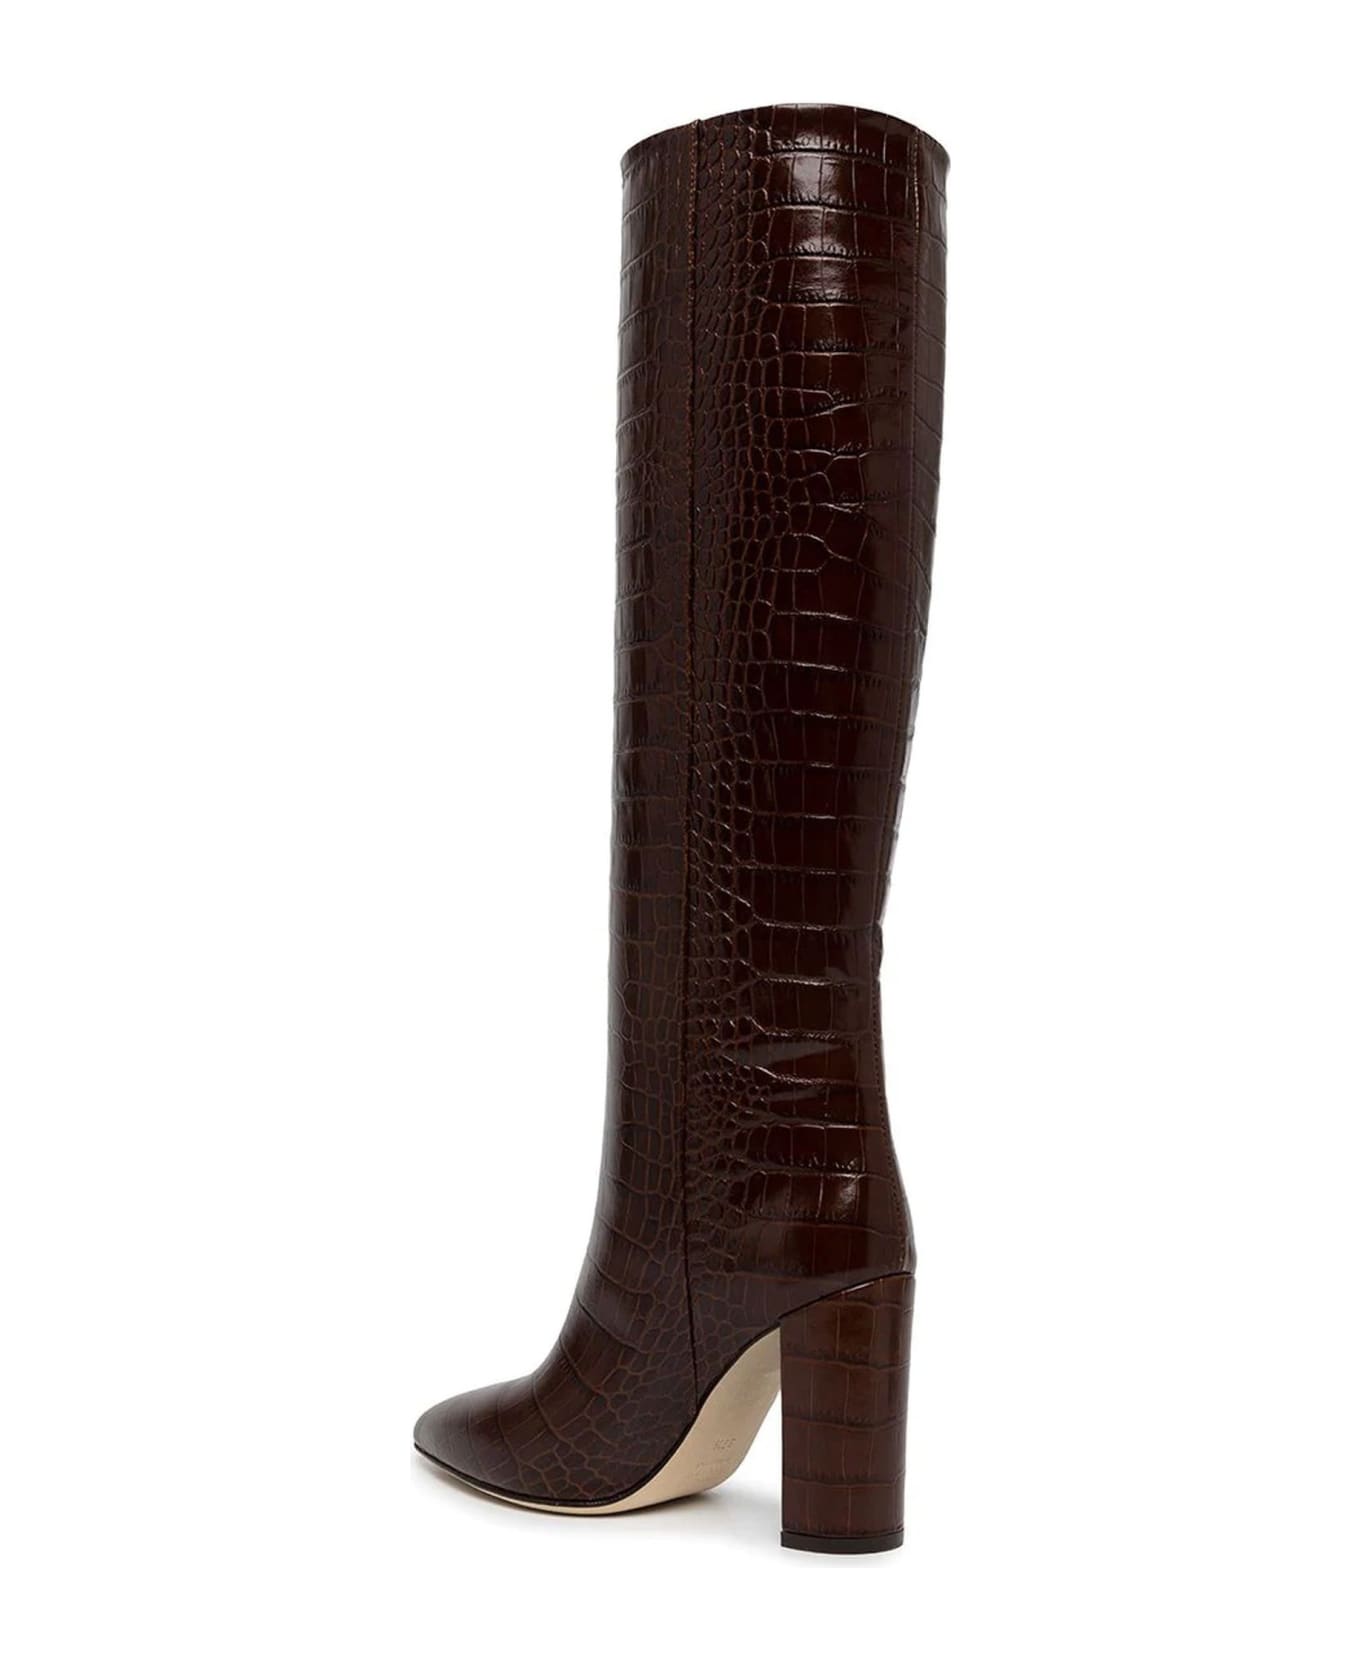 Paris Texas Brown Leather High Boots - Marrone